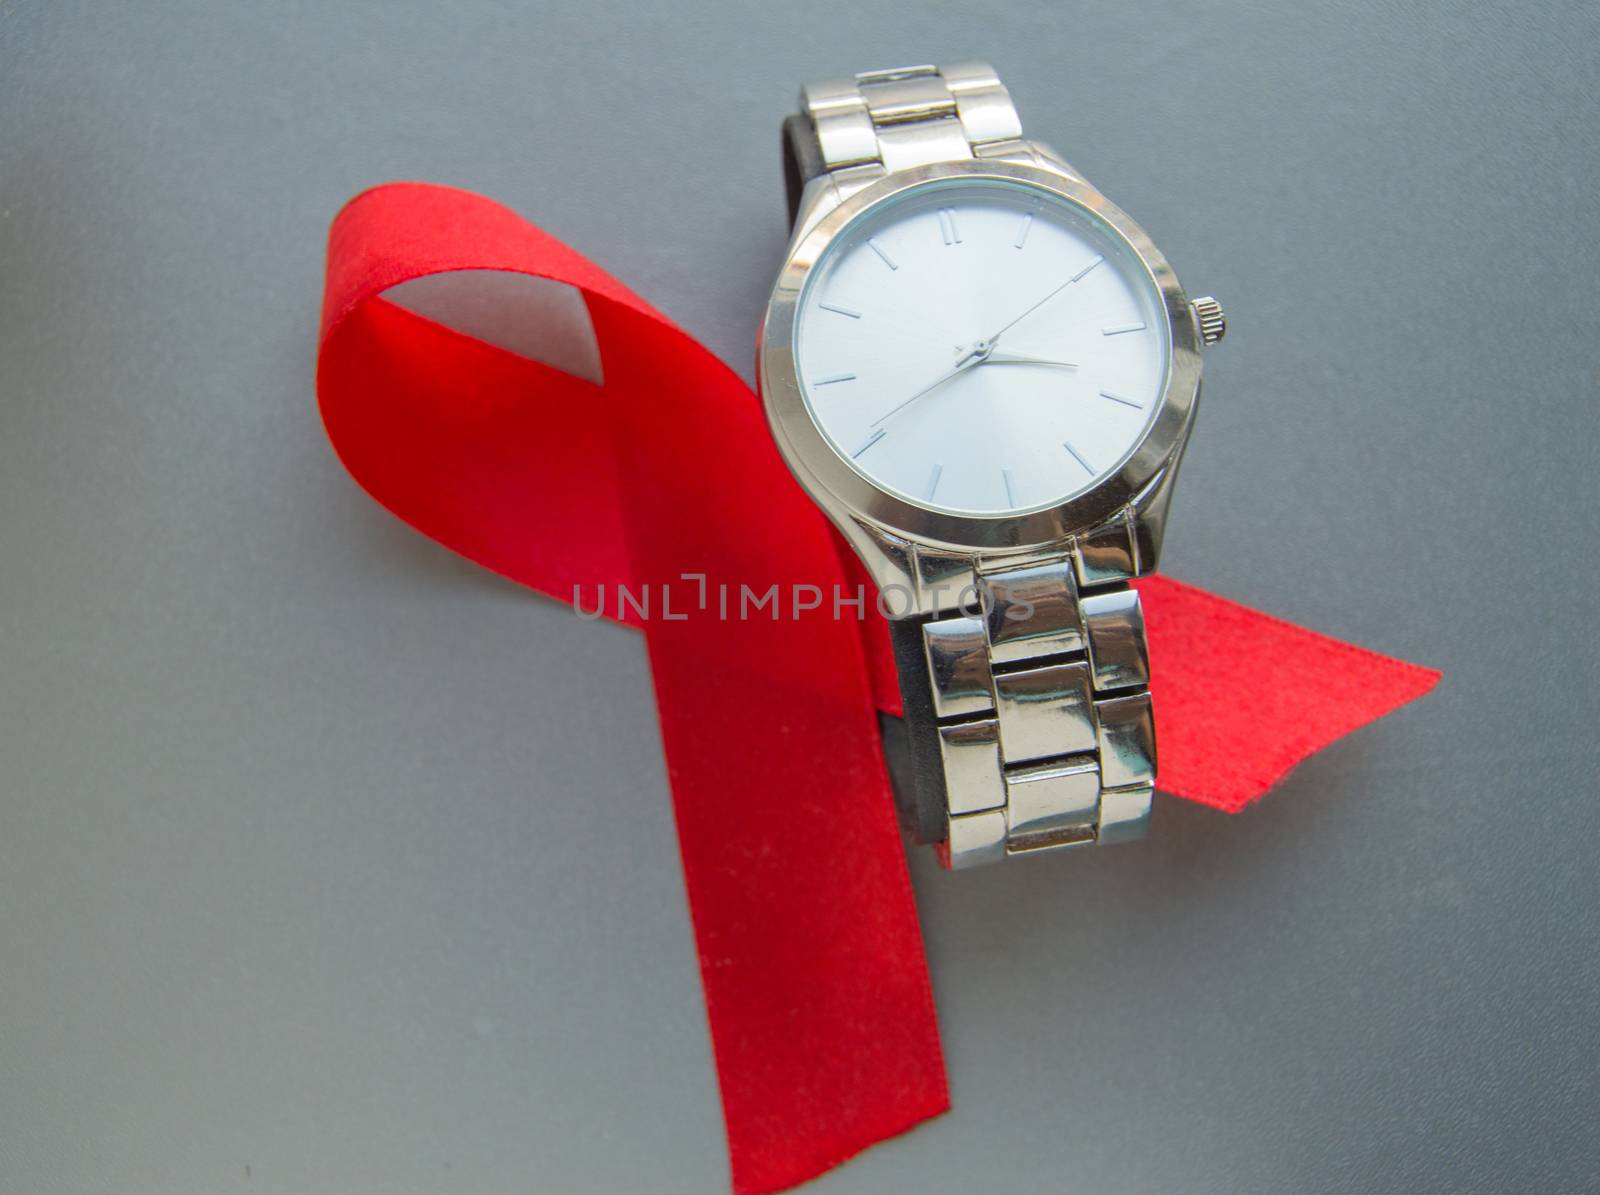 World AIDS day, the symbol of the red ribbon and the clock - do not waste time to start treatment by claire_lucia